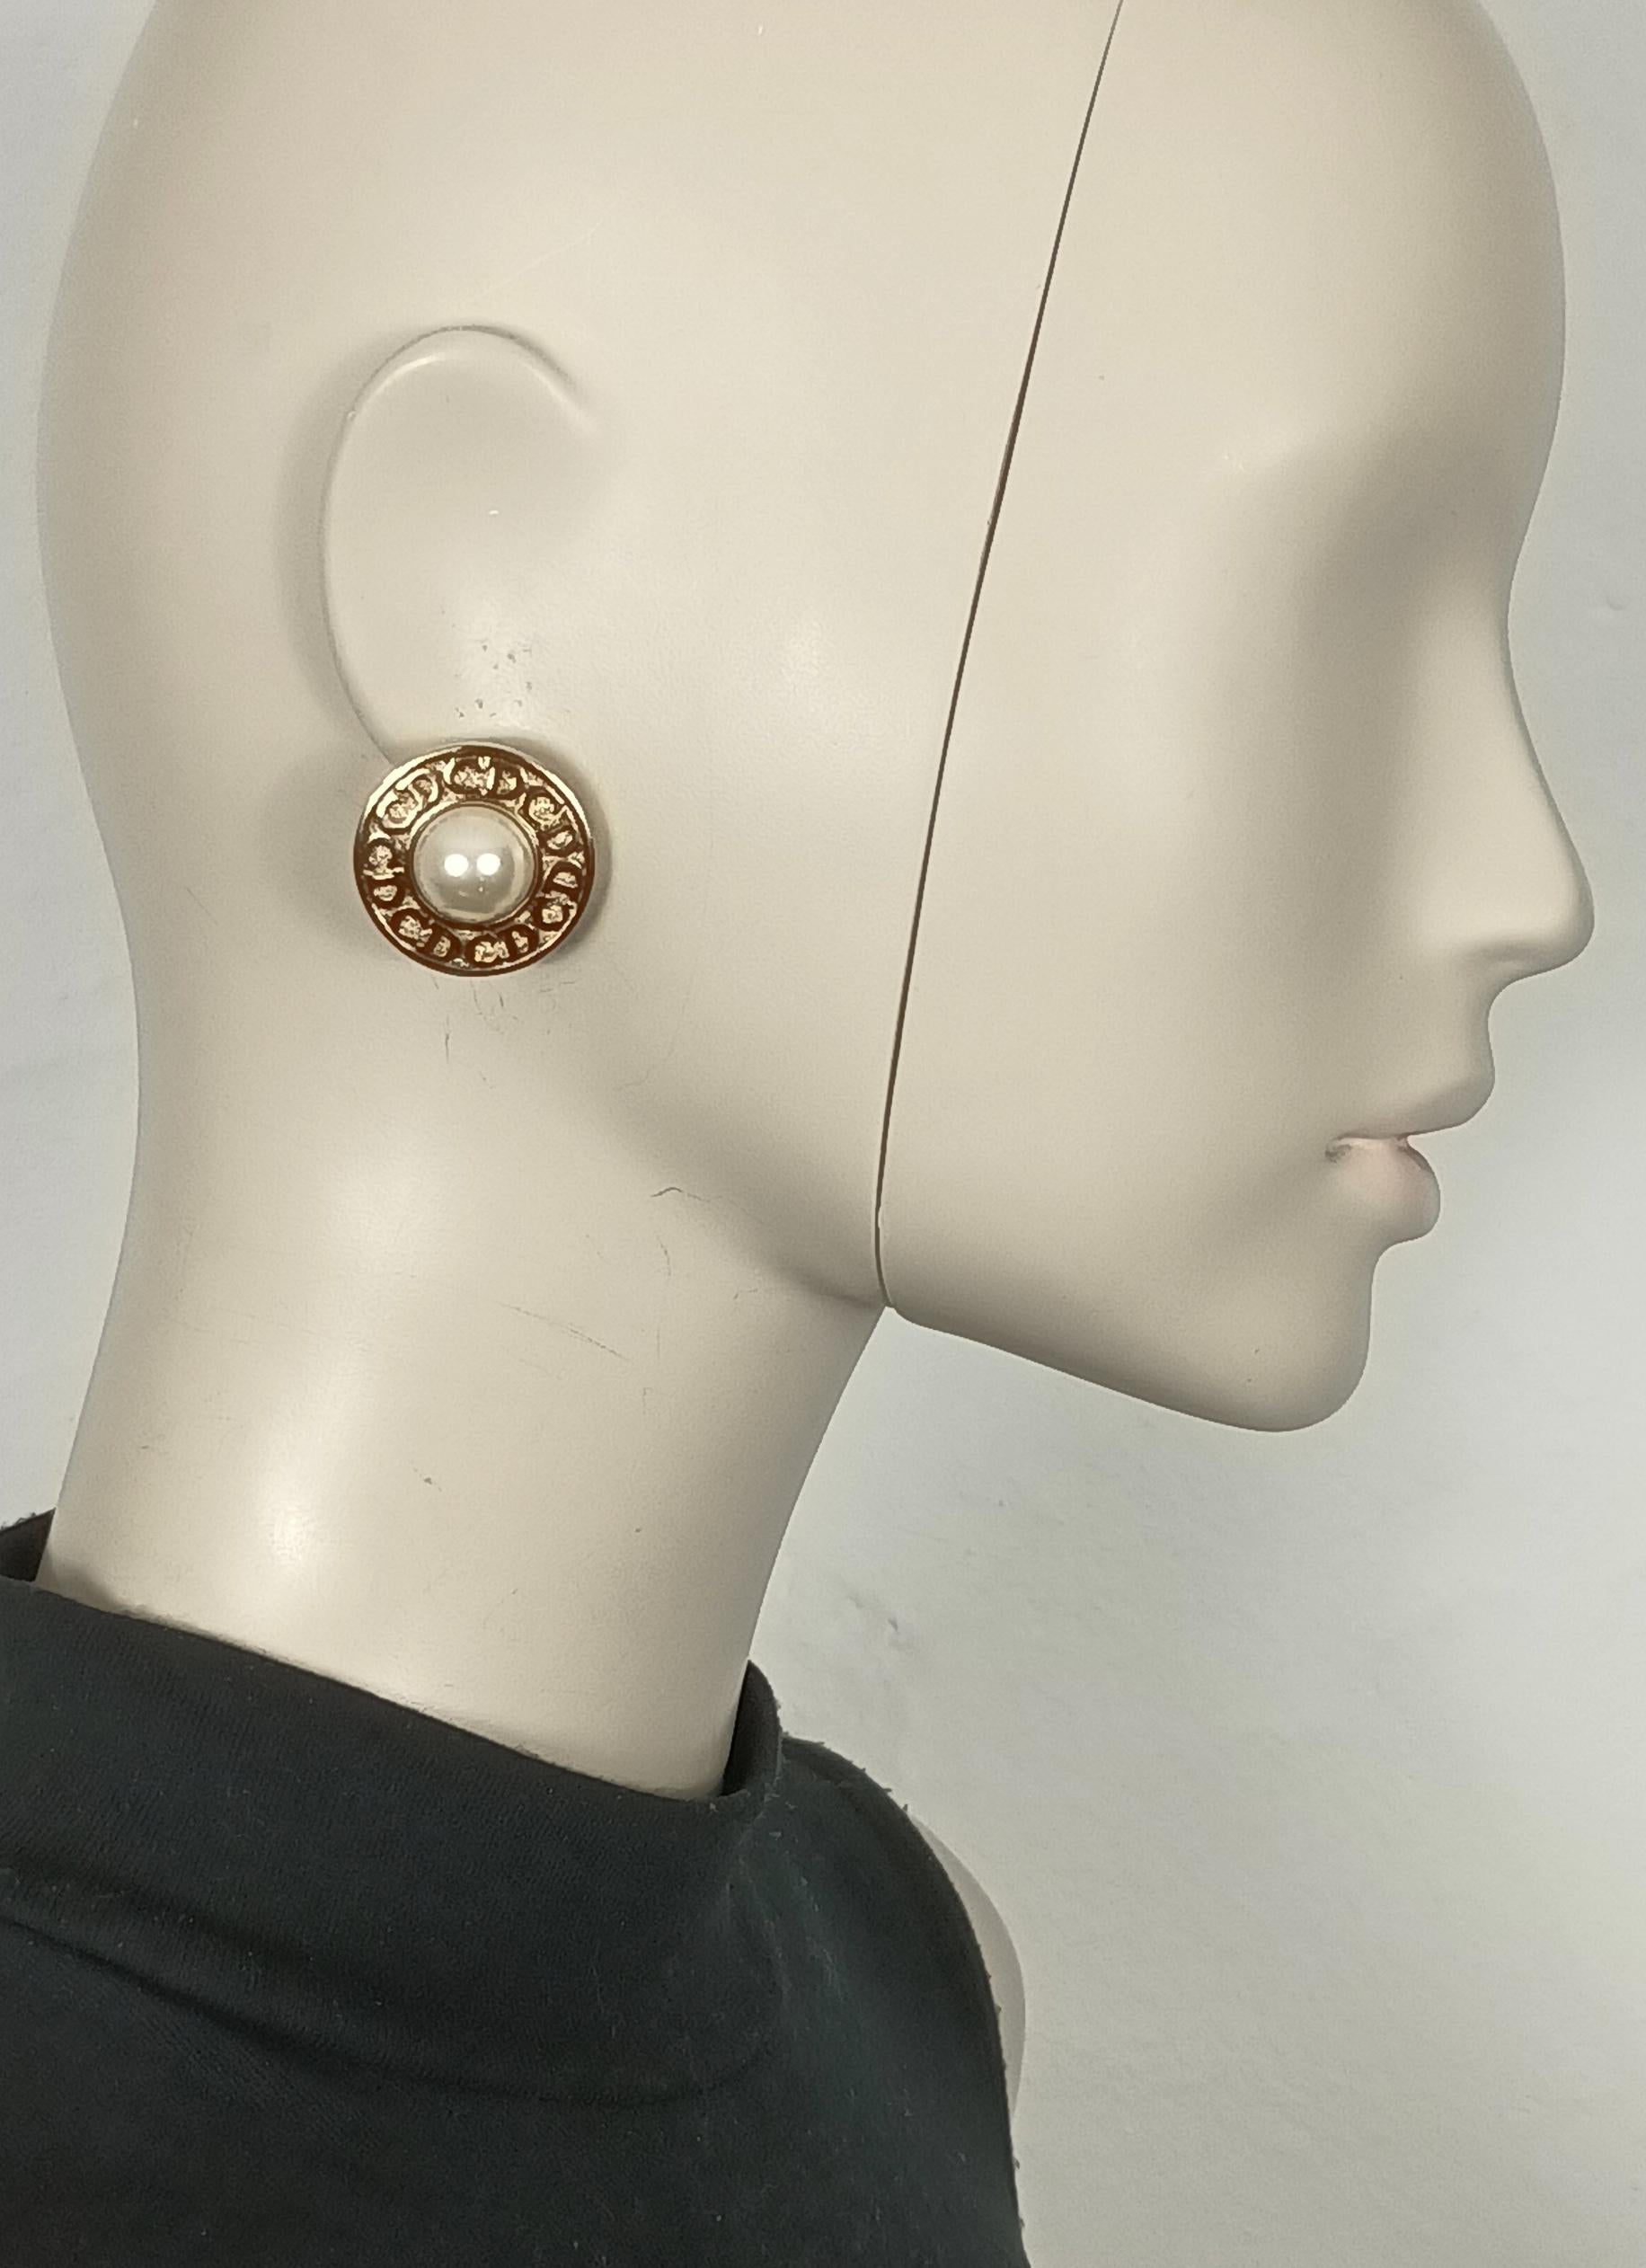 CHRISTIAN DIOR vintage gold tone clip-on earrings embossed with CD logos and embellished with a faux pearl at the center.

Embossed CHR. DIOR © Germany.

Indicative measurements : diameter approx. 2.6 cm (1.02 inches).

Weight per earring : approx.